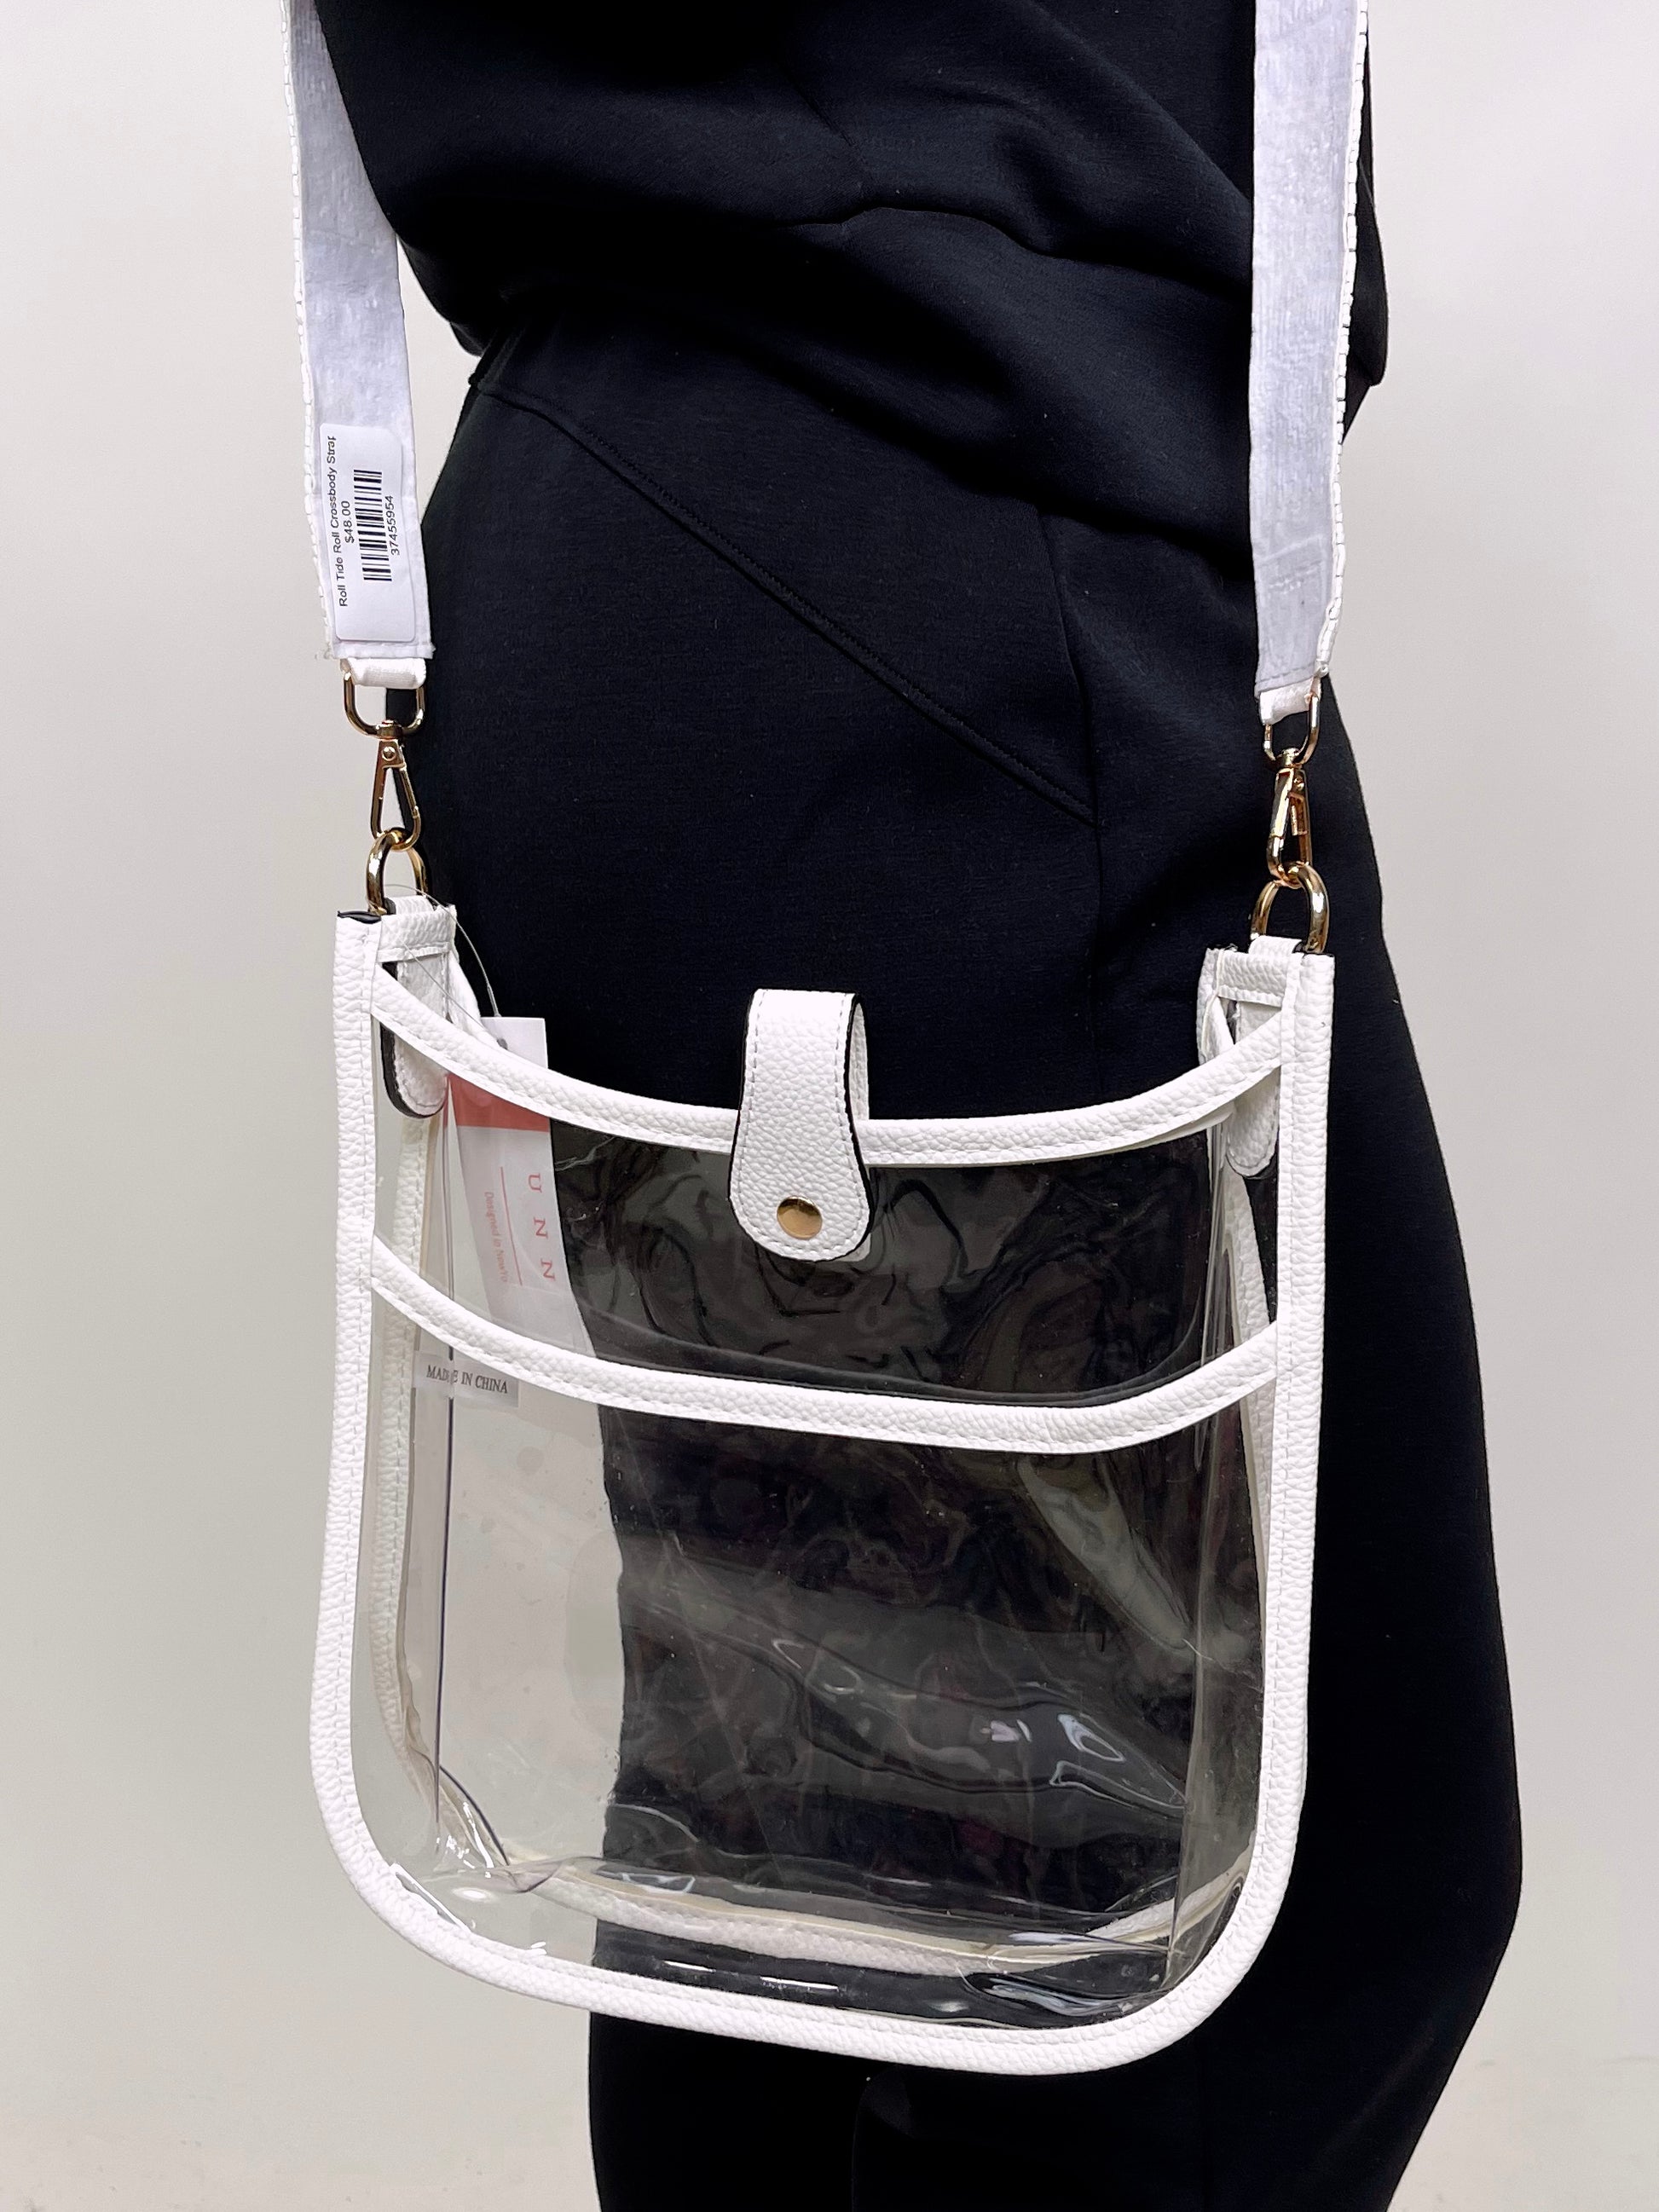 Clear Stadium Crossbody Bag-Crossbody-Mimi Wholesale-The Village Shoppe, Women’s Fashion Boutique, Shop Online and In Store - Located in Muscle Shoals, AL.